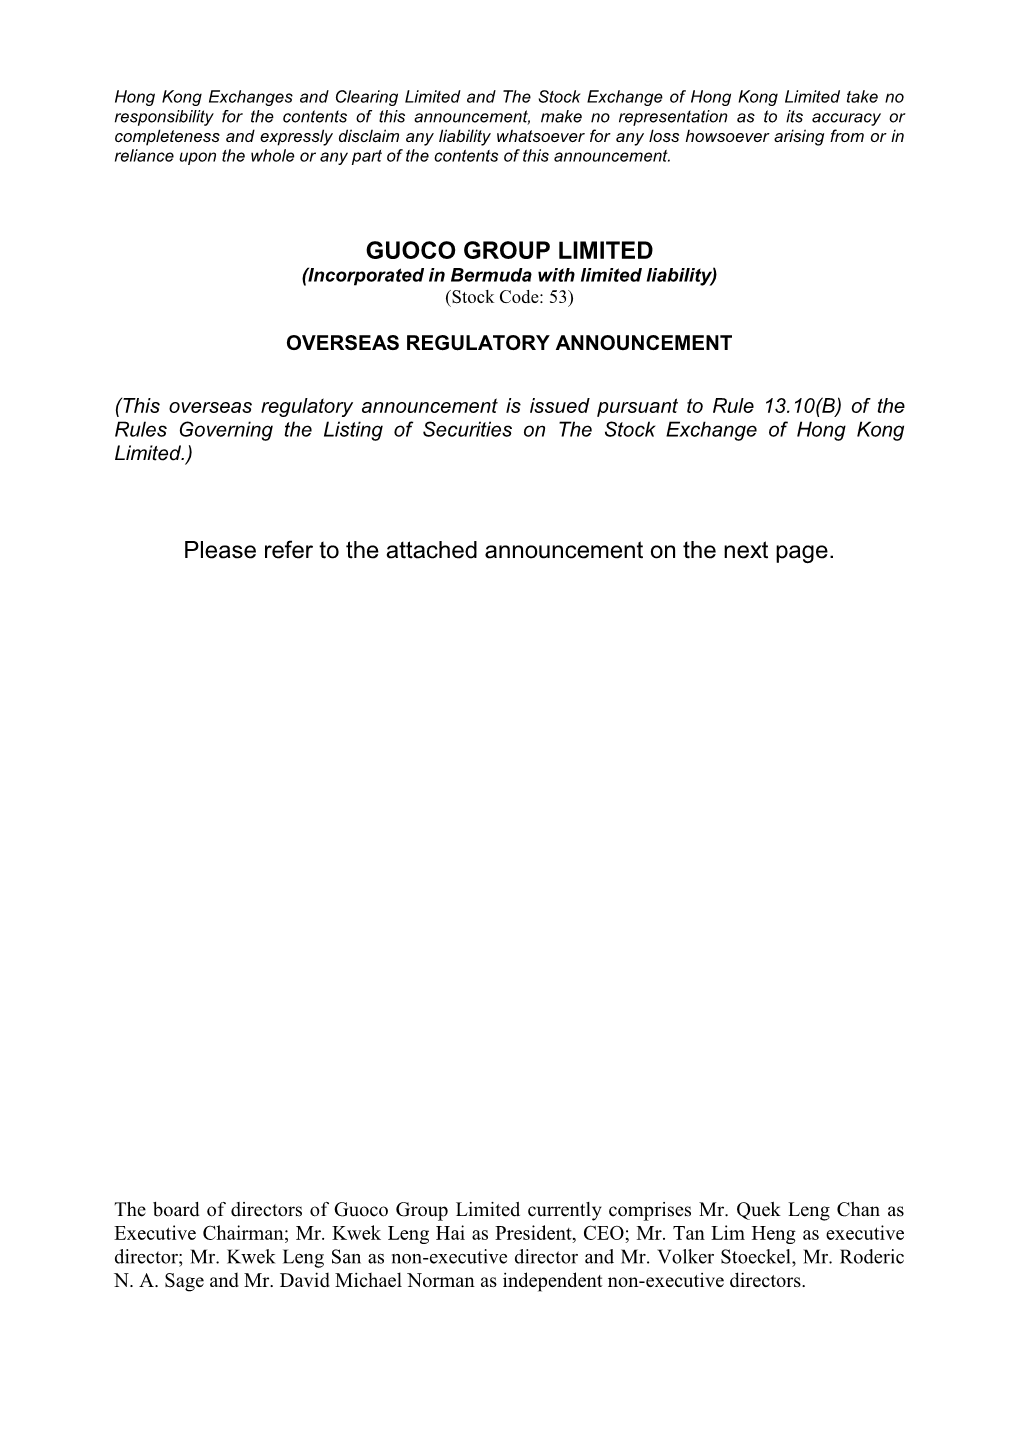 GUOCO GROUP LIMITED Please Refer to the Attached Announcement